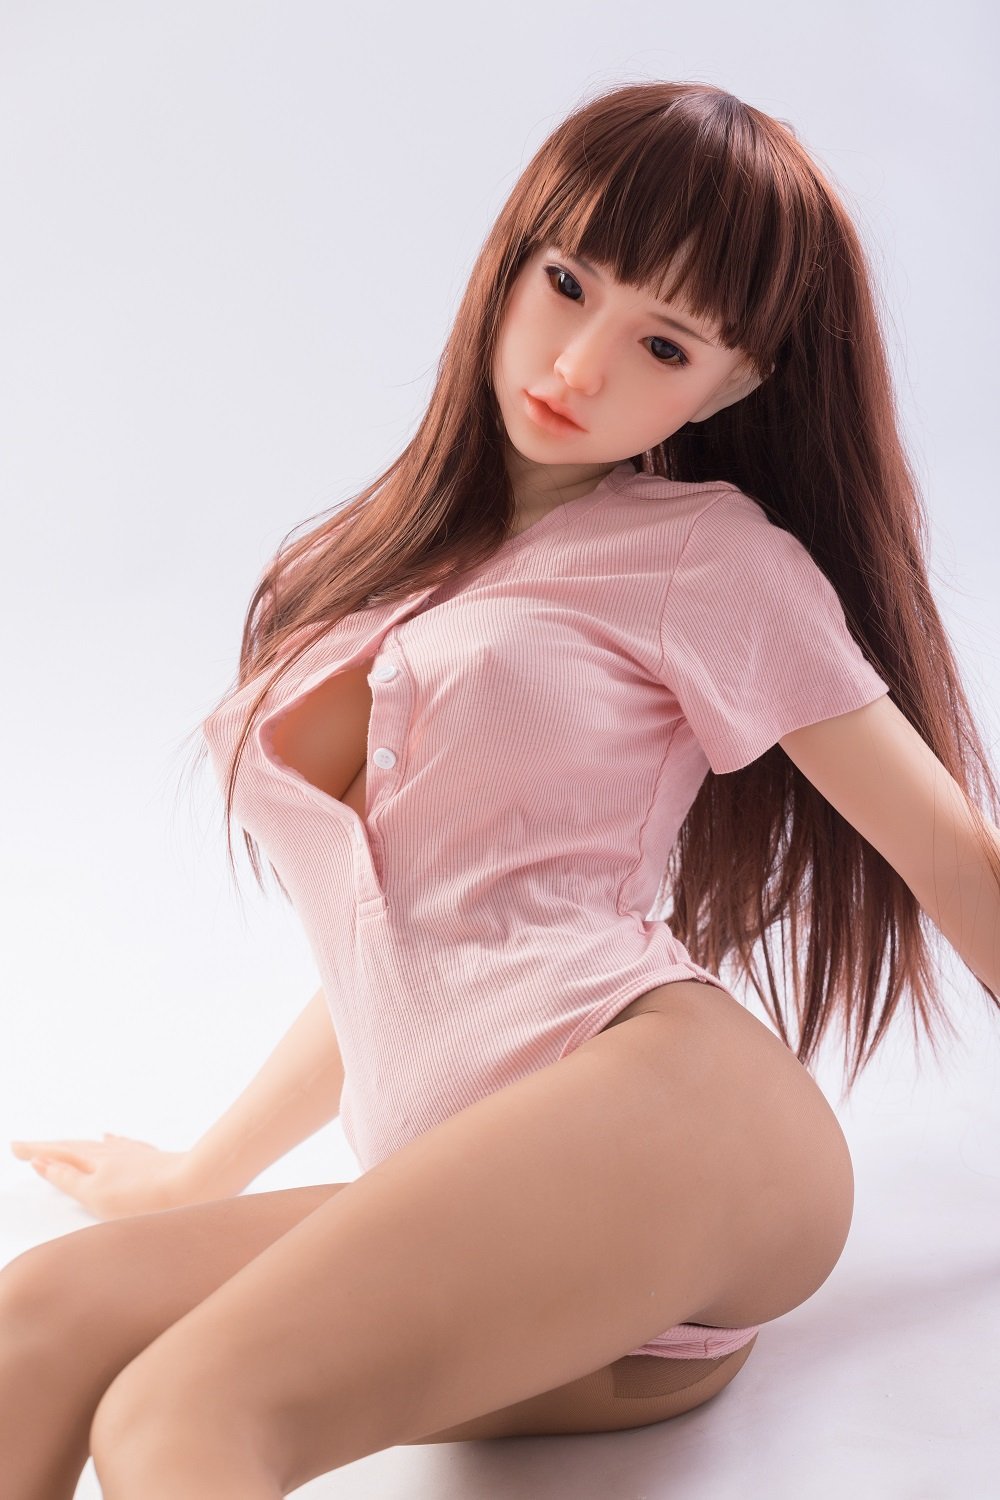 145cm Life Size Adult Doll Japan Love Doll Cheap